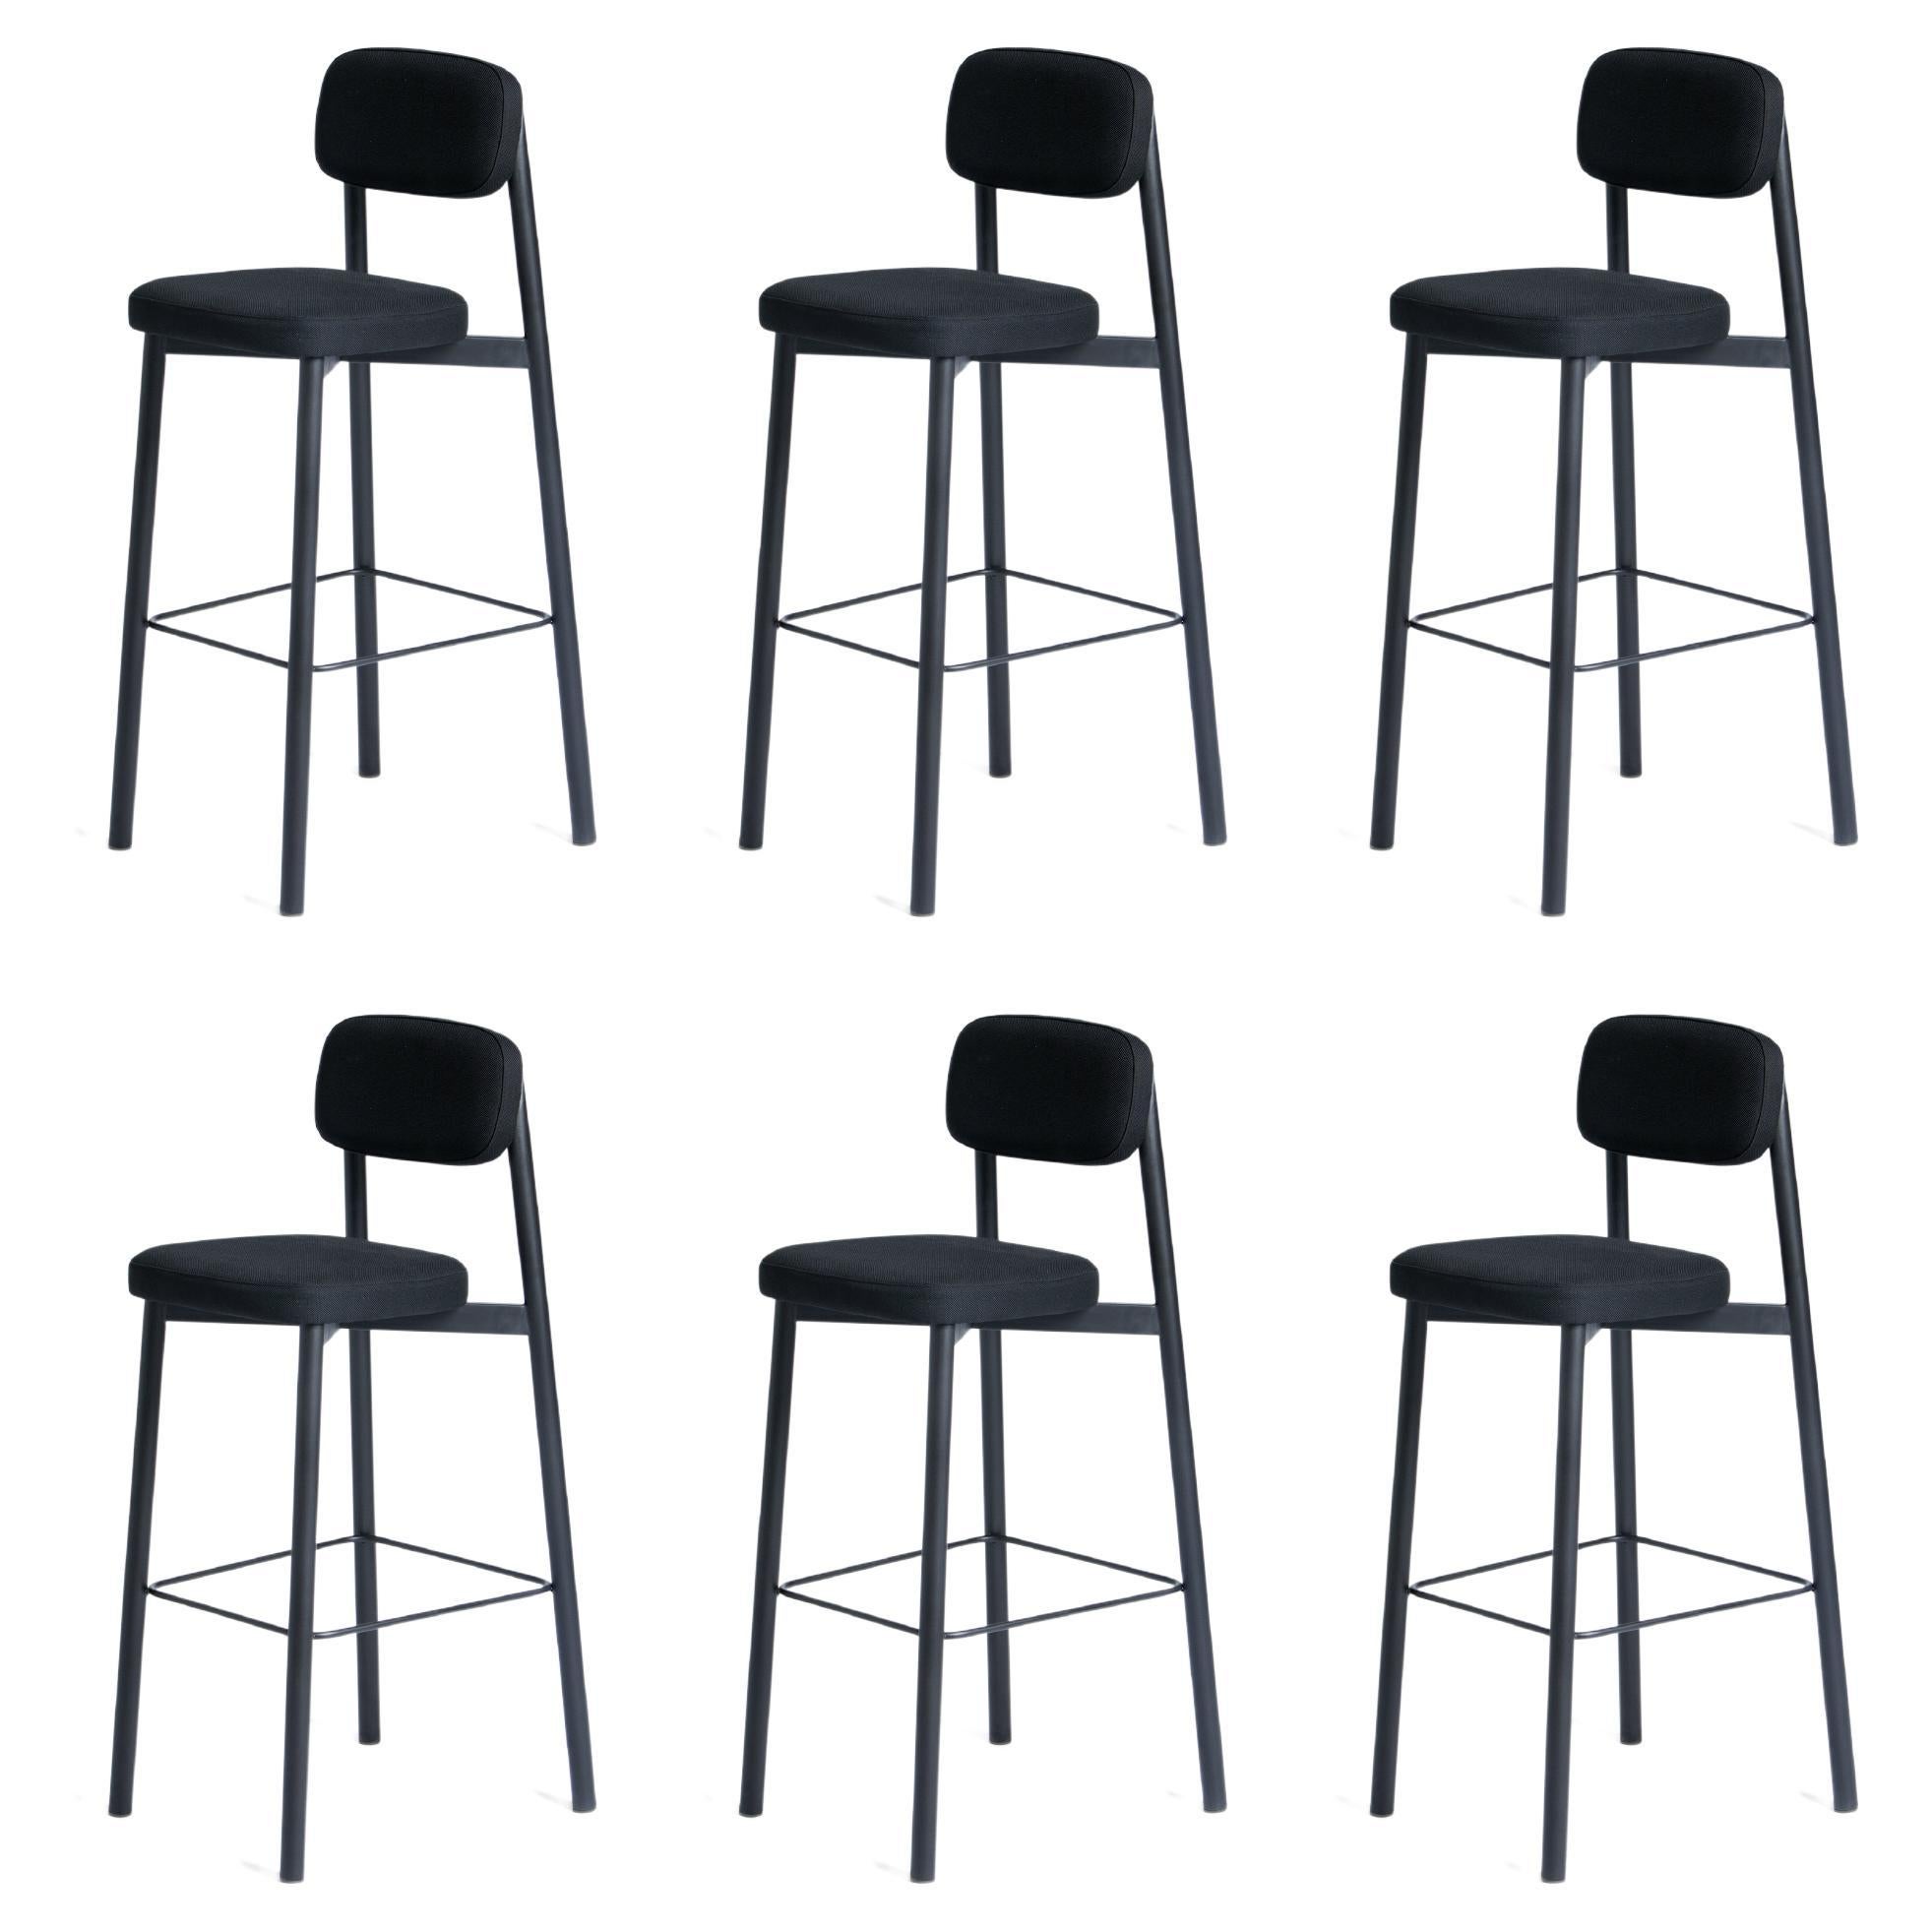 Set of 6 Black Residence 75 Counter Chairs by Kann Design For Sale